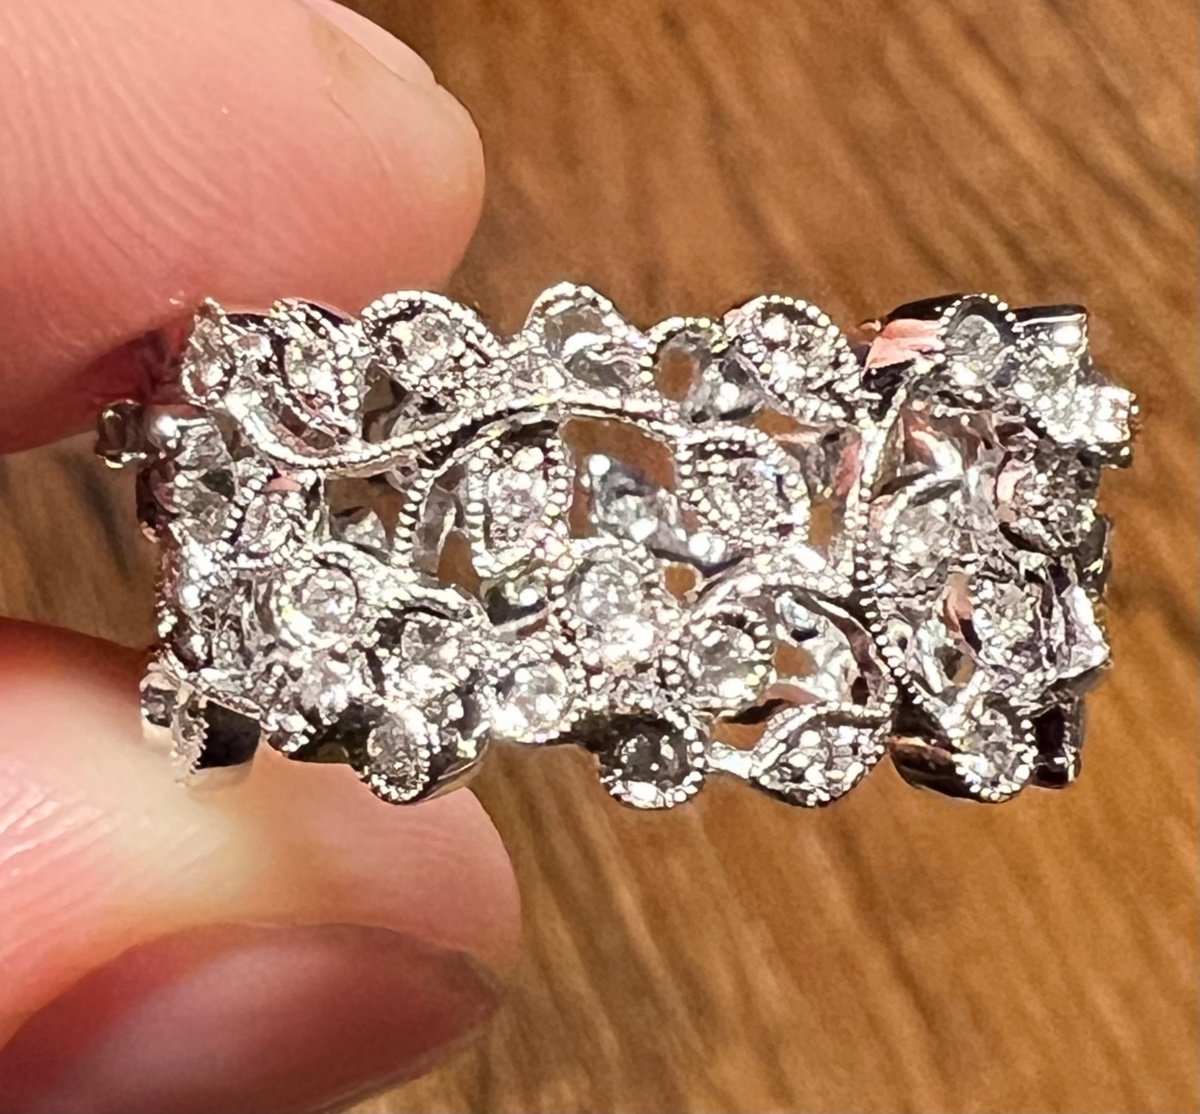 Diamond Wedding Ring In White Gold Crafted With Flower Motifs